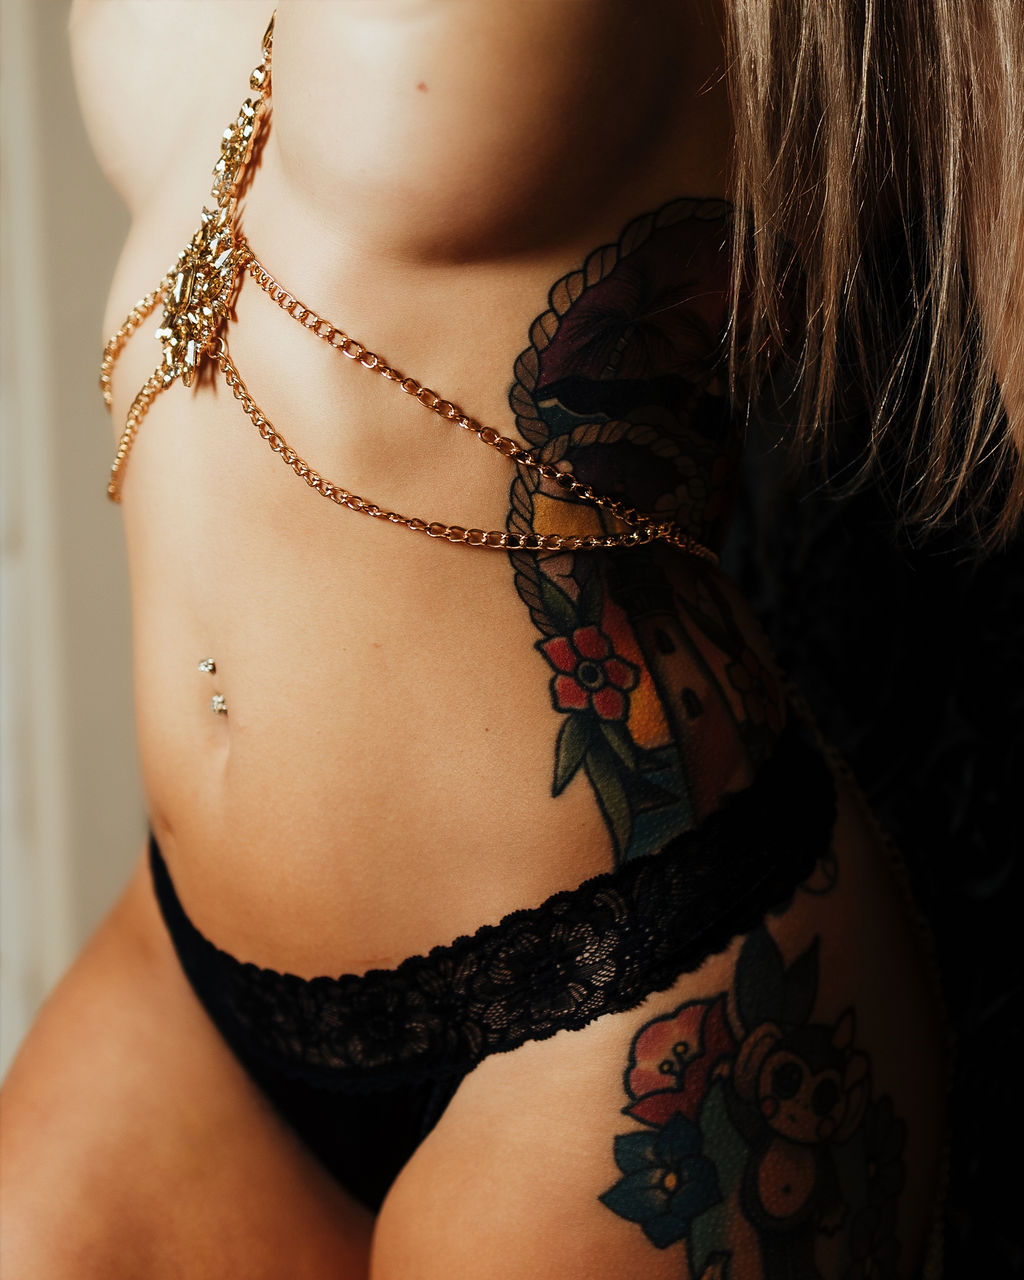 Details of a woman in lace underwear and chain jewelry